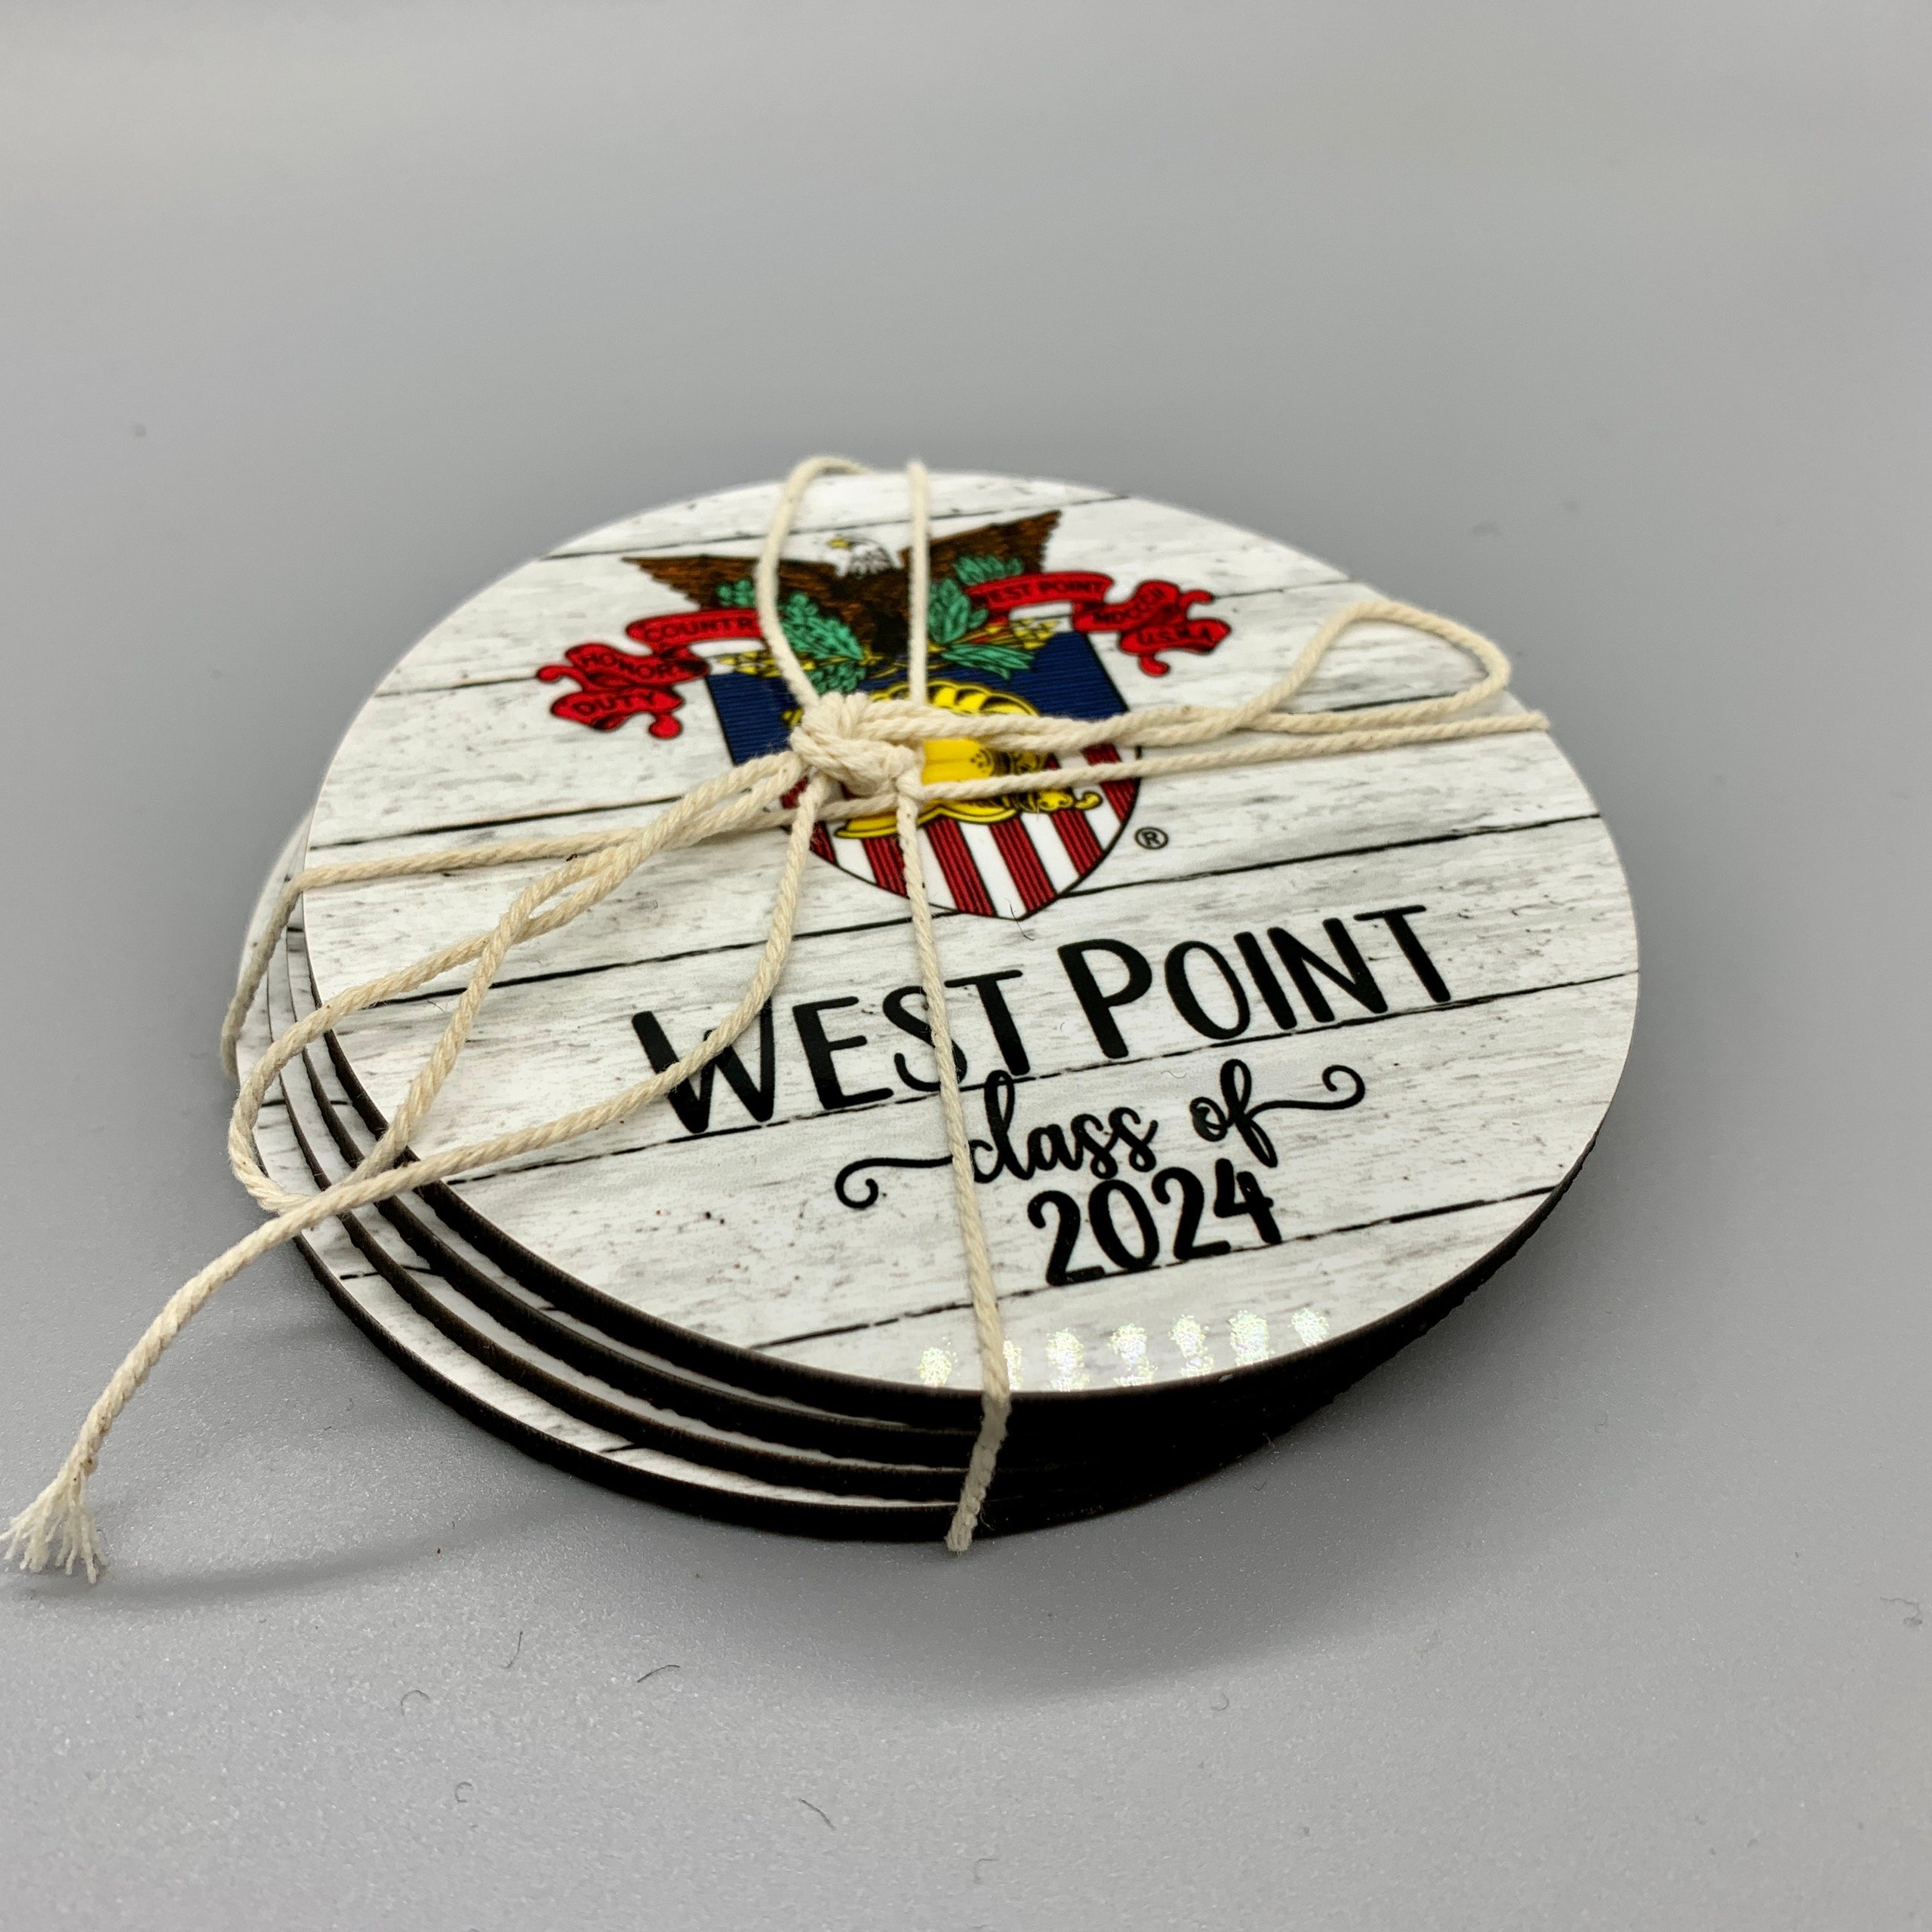 Hardboard Coasters Class of 2024 West Point Crest (Set of 4) West